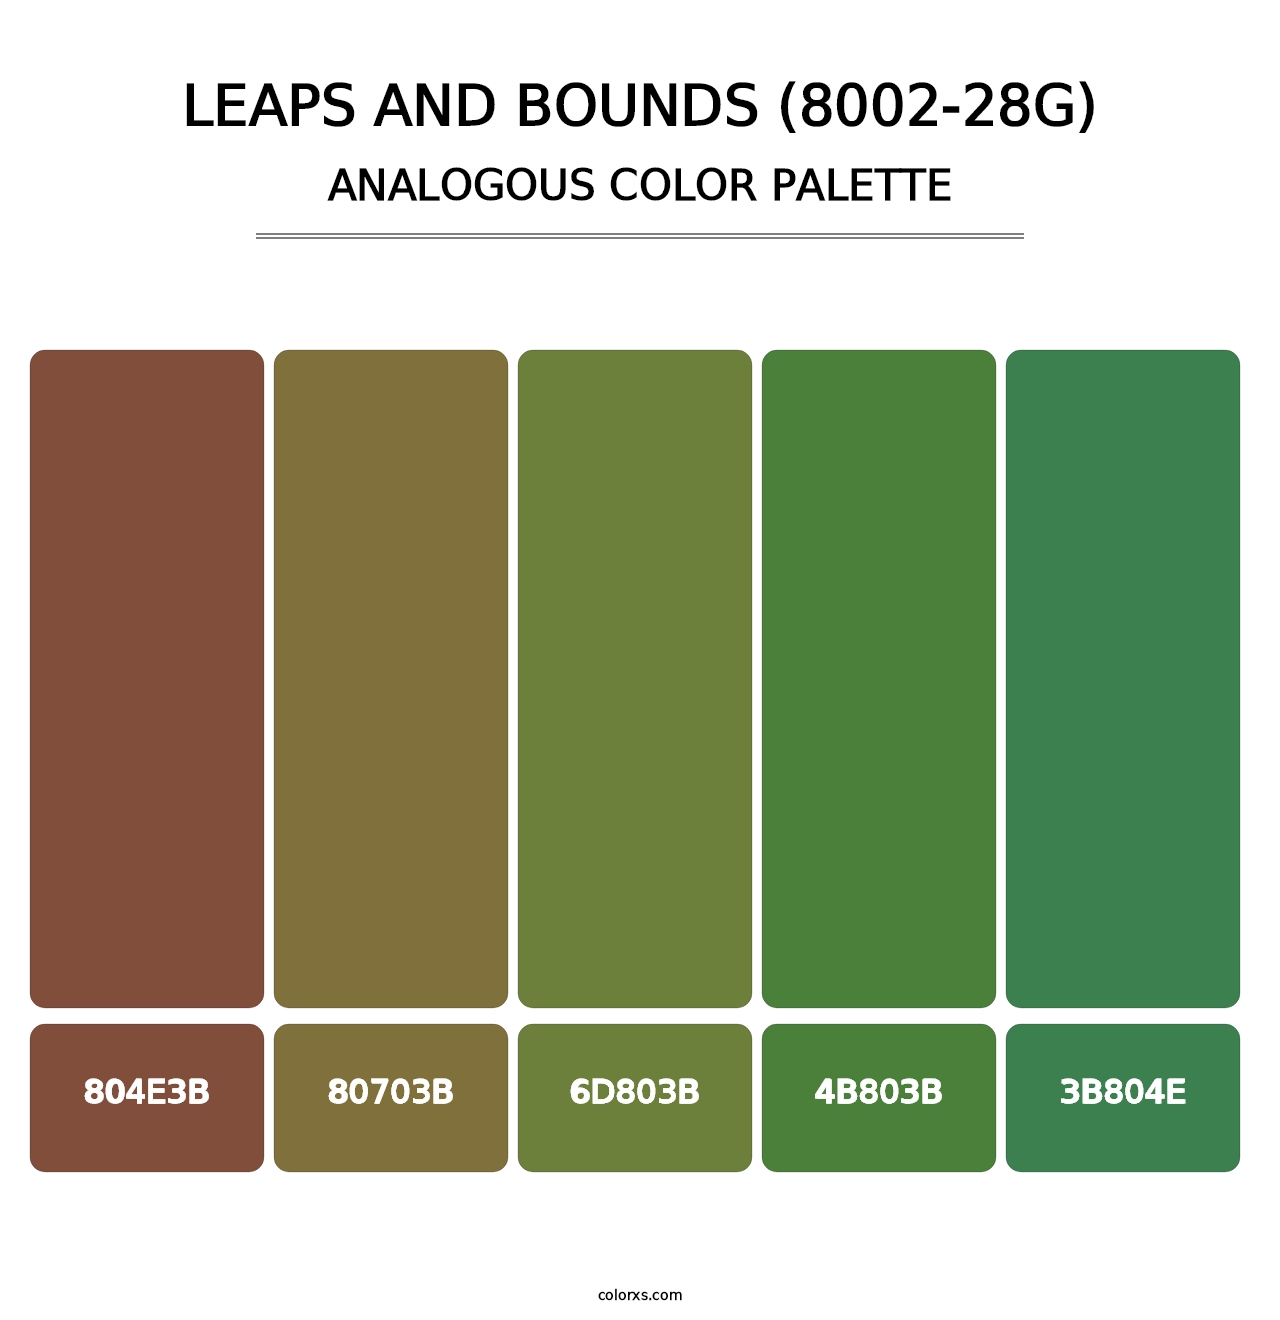 Leaps and Bounds (8002-28G) - Analogous Color Palette